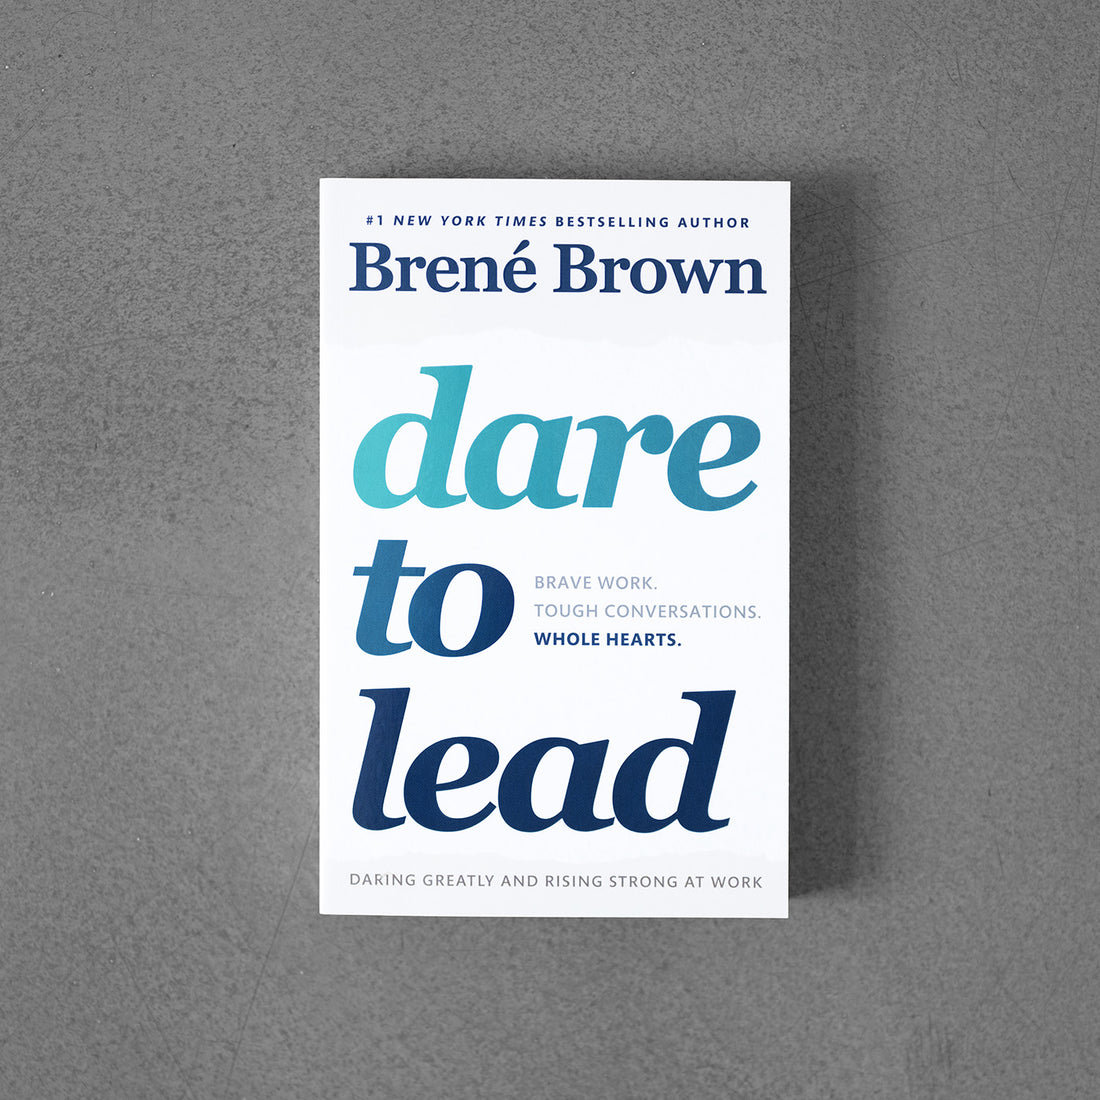 Dare to Lead: Brave Work. Tough Conversations. Whole Hearts –Brene Brown.